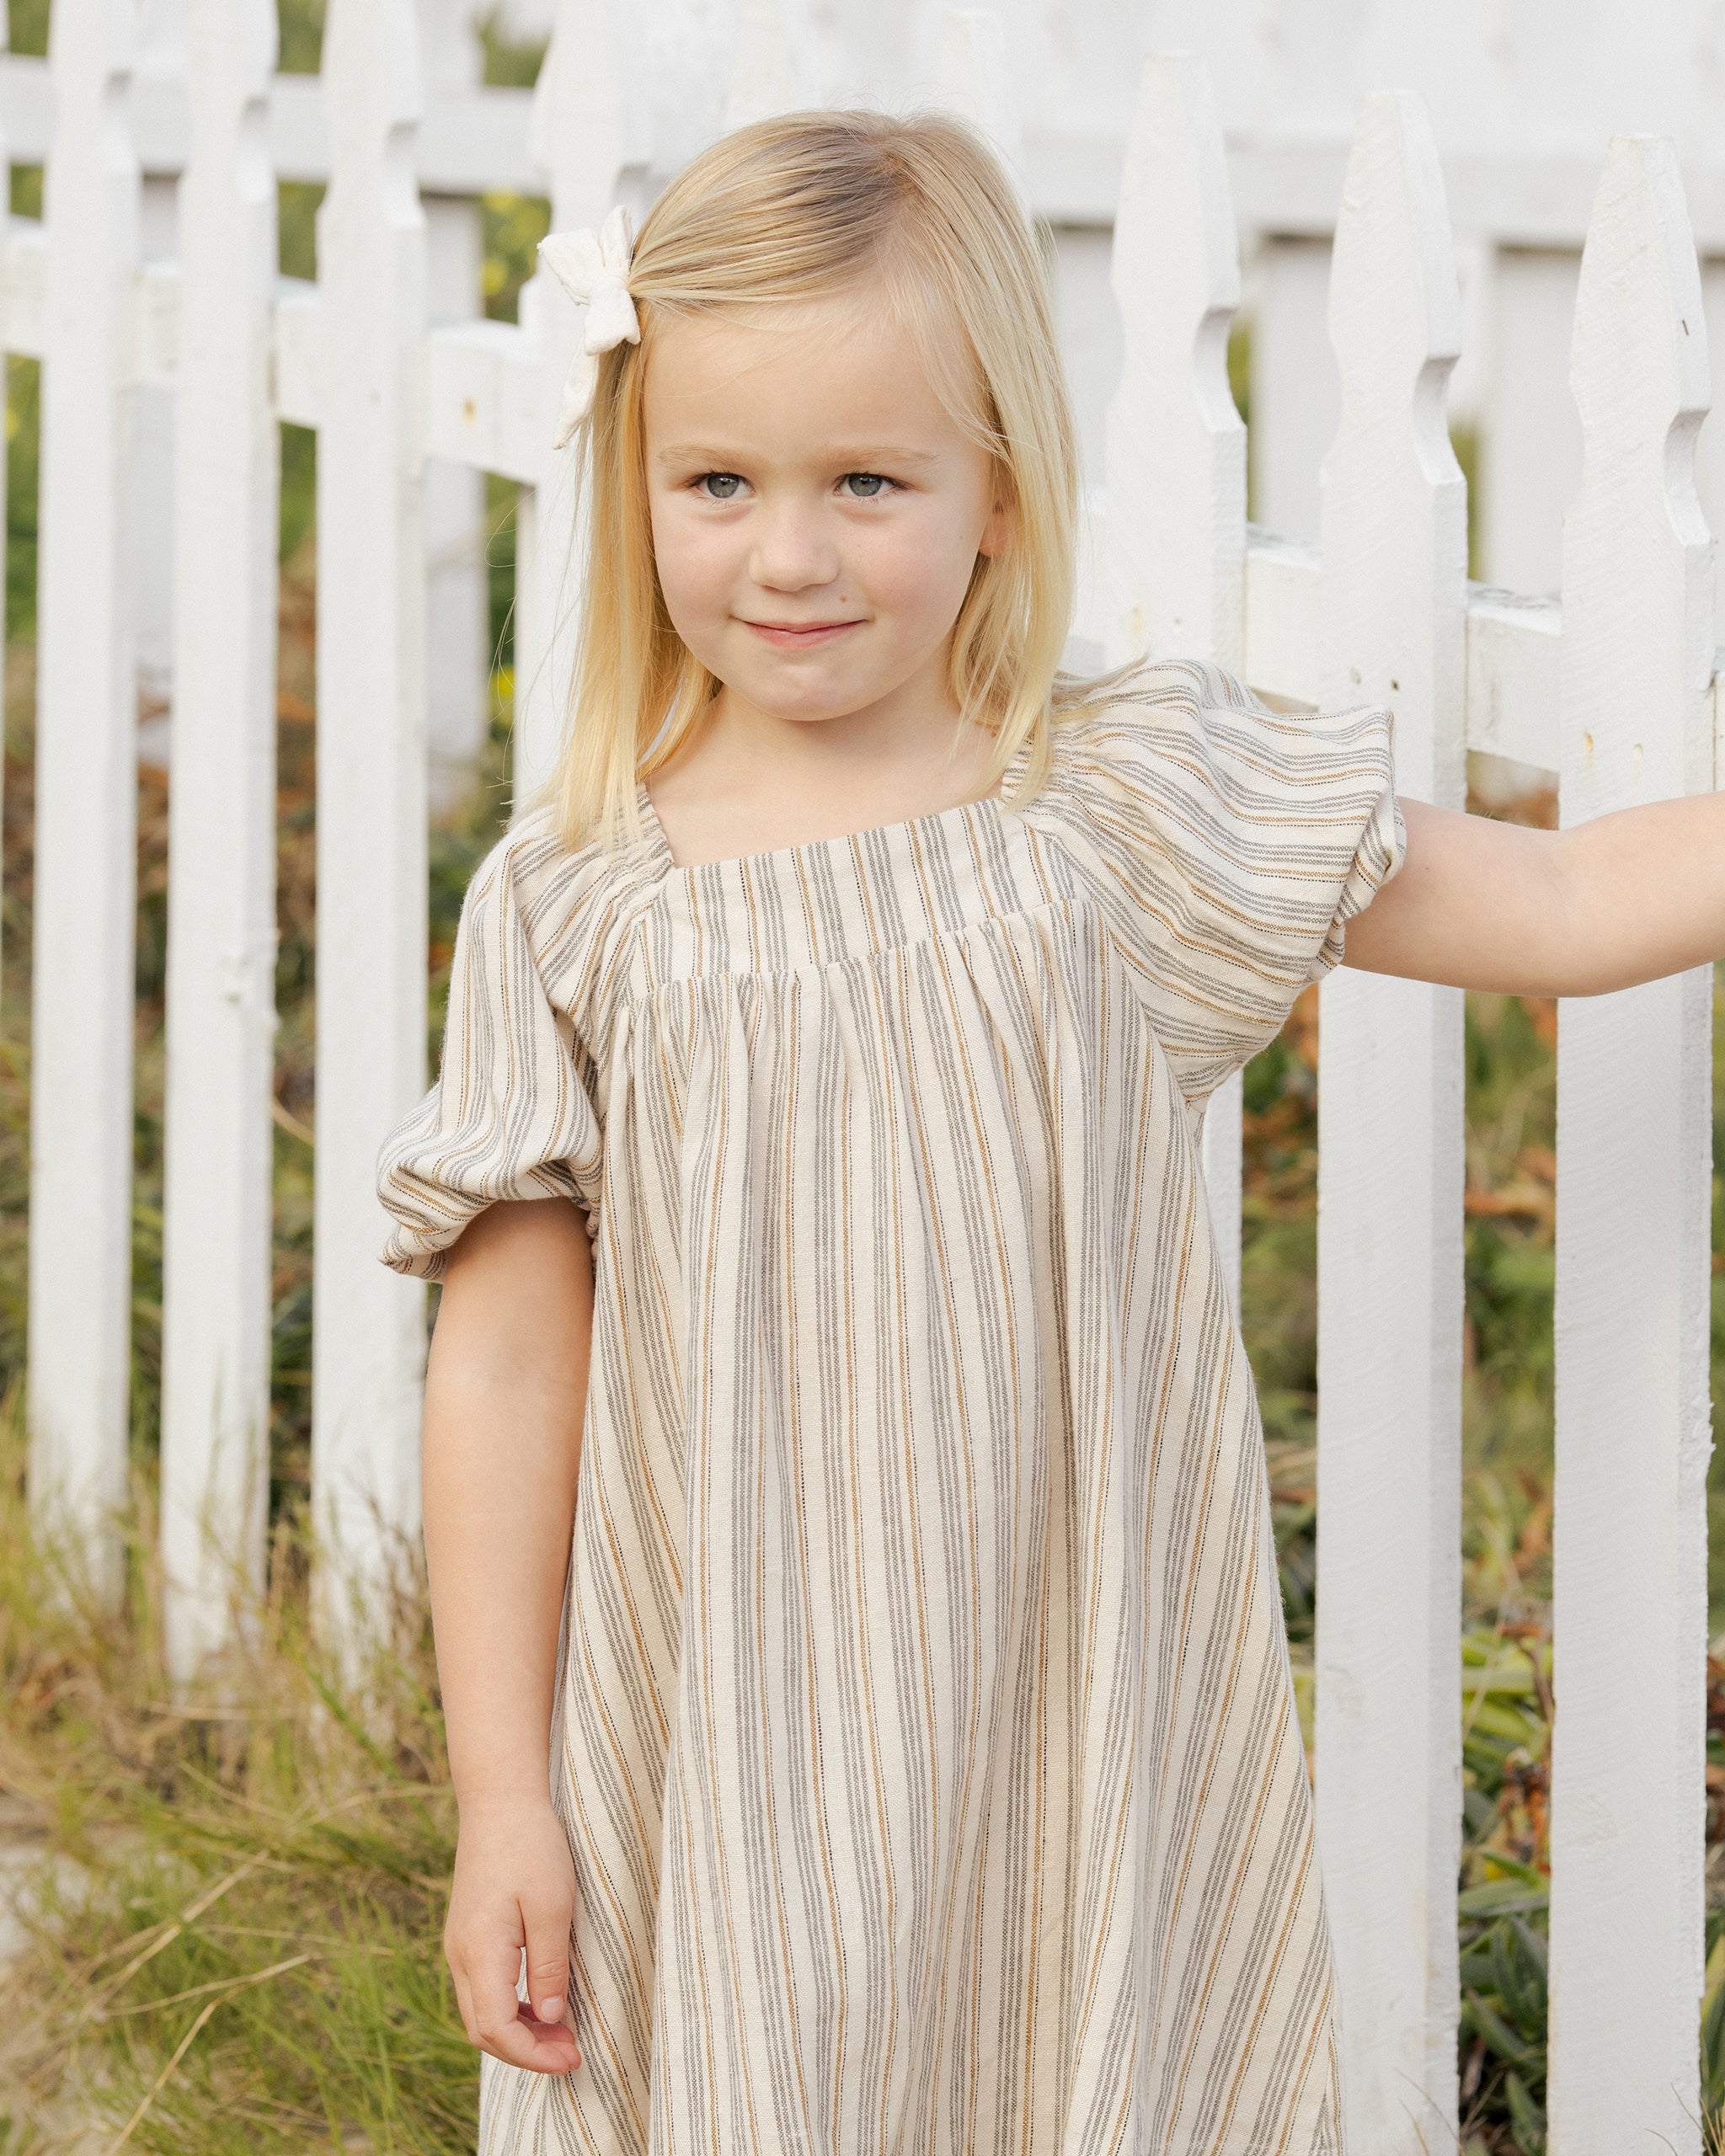 Talee Dress || Nautical Stripe - Rylee + Cru | Kids Clothes | Trendy Baby Clothes | Modern Infant Outfits |